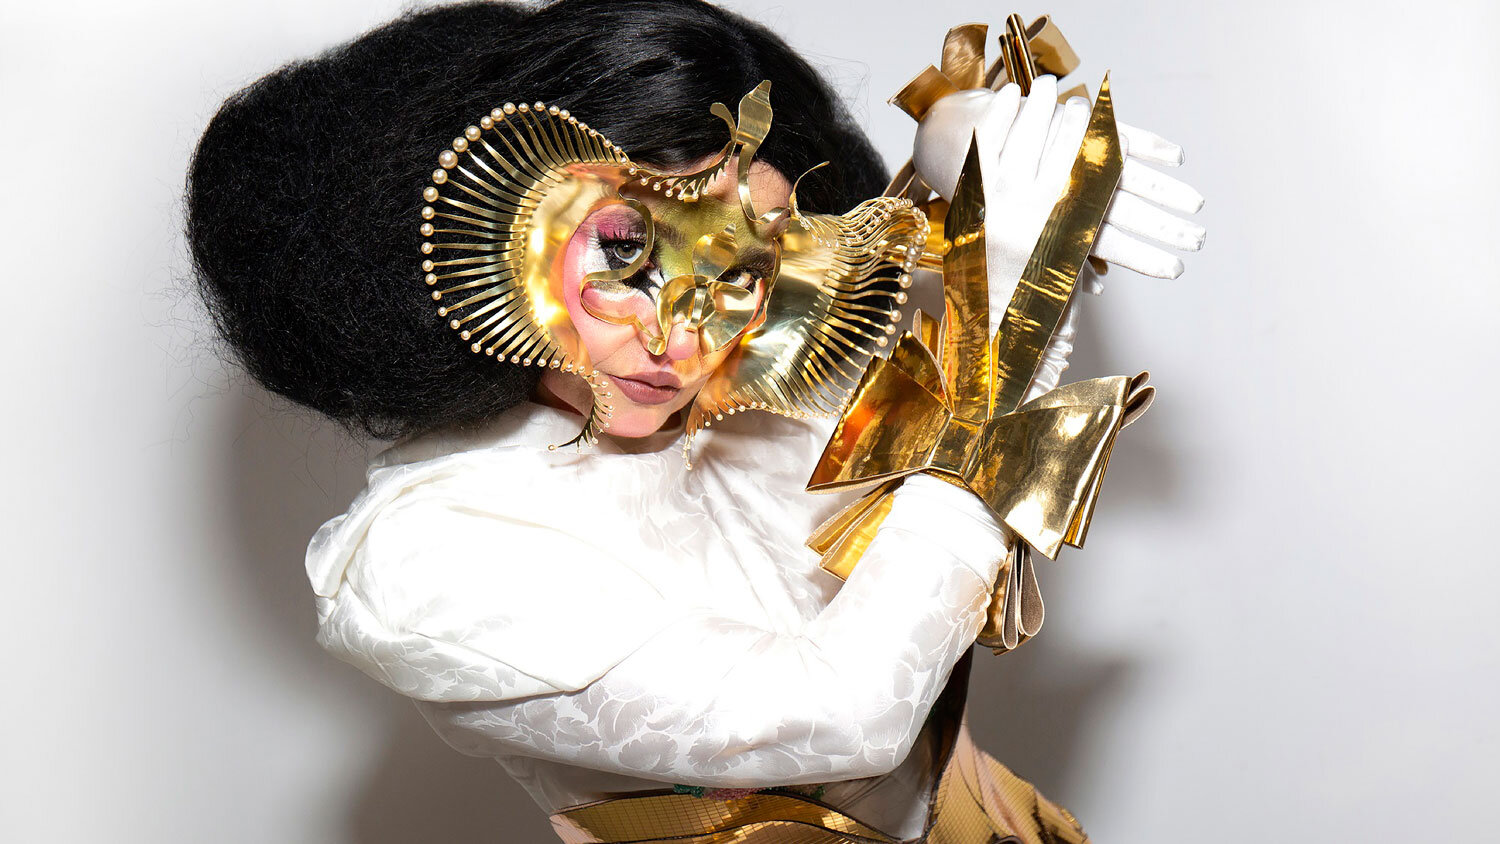  Björk Brings Her Choral Arrangements To Life With AI At Sister City